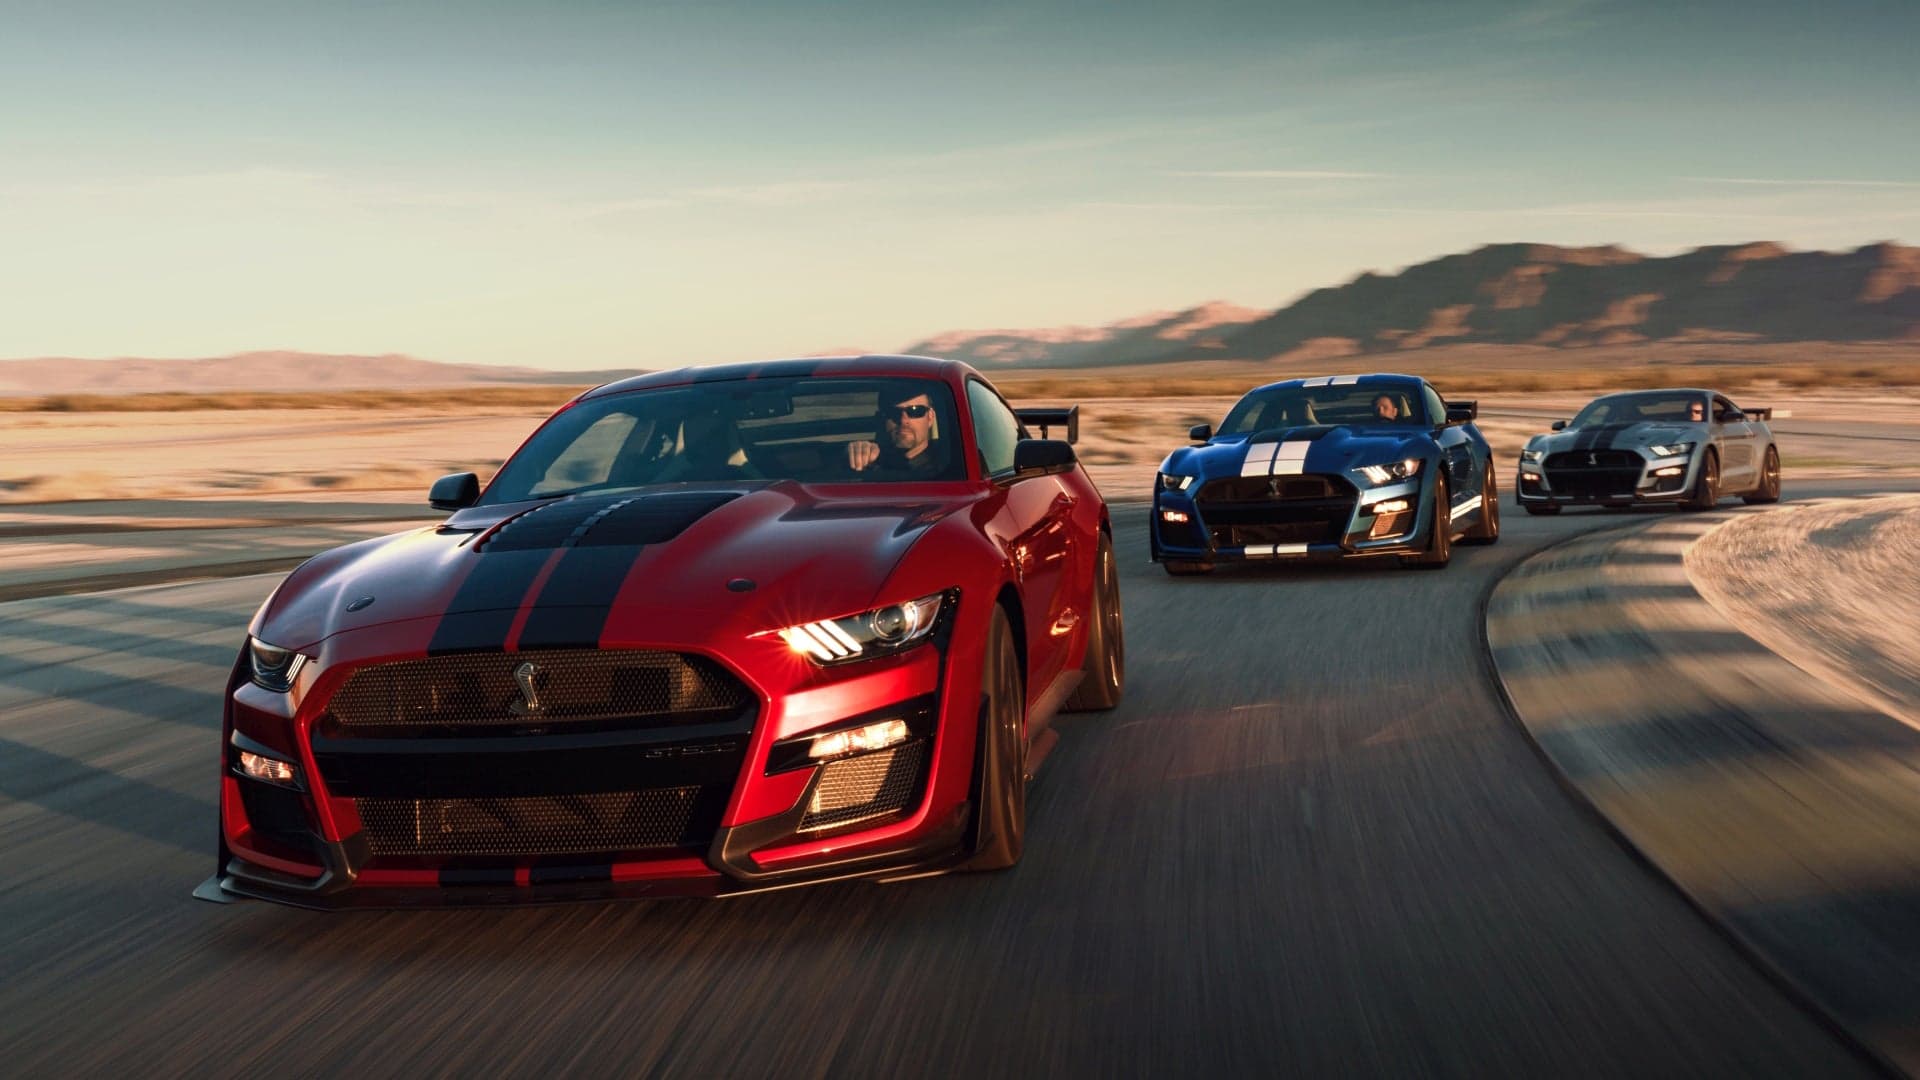 Dealership Lists 2020 Ford Mustang Shelby GT500 for Outrageous $169,900